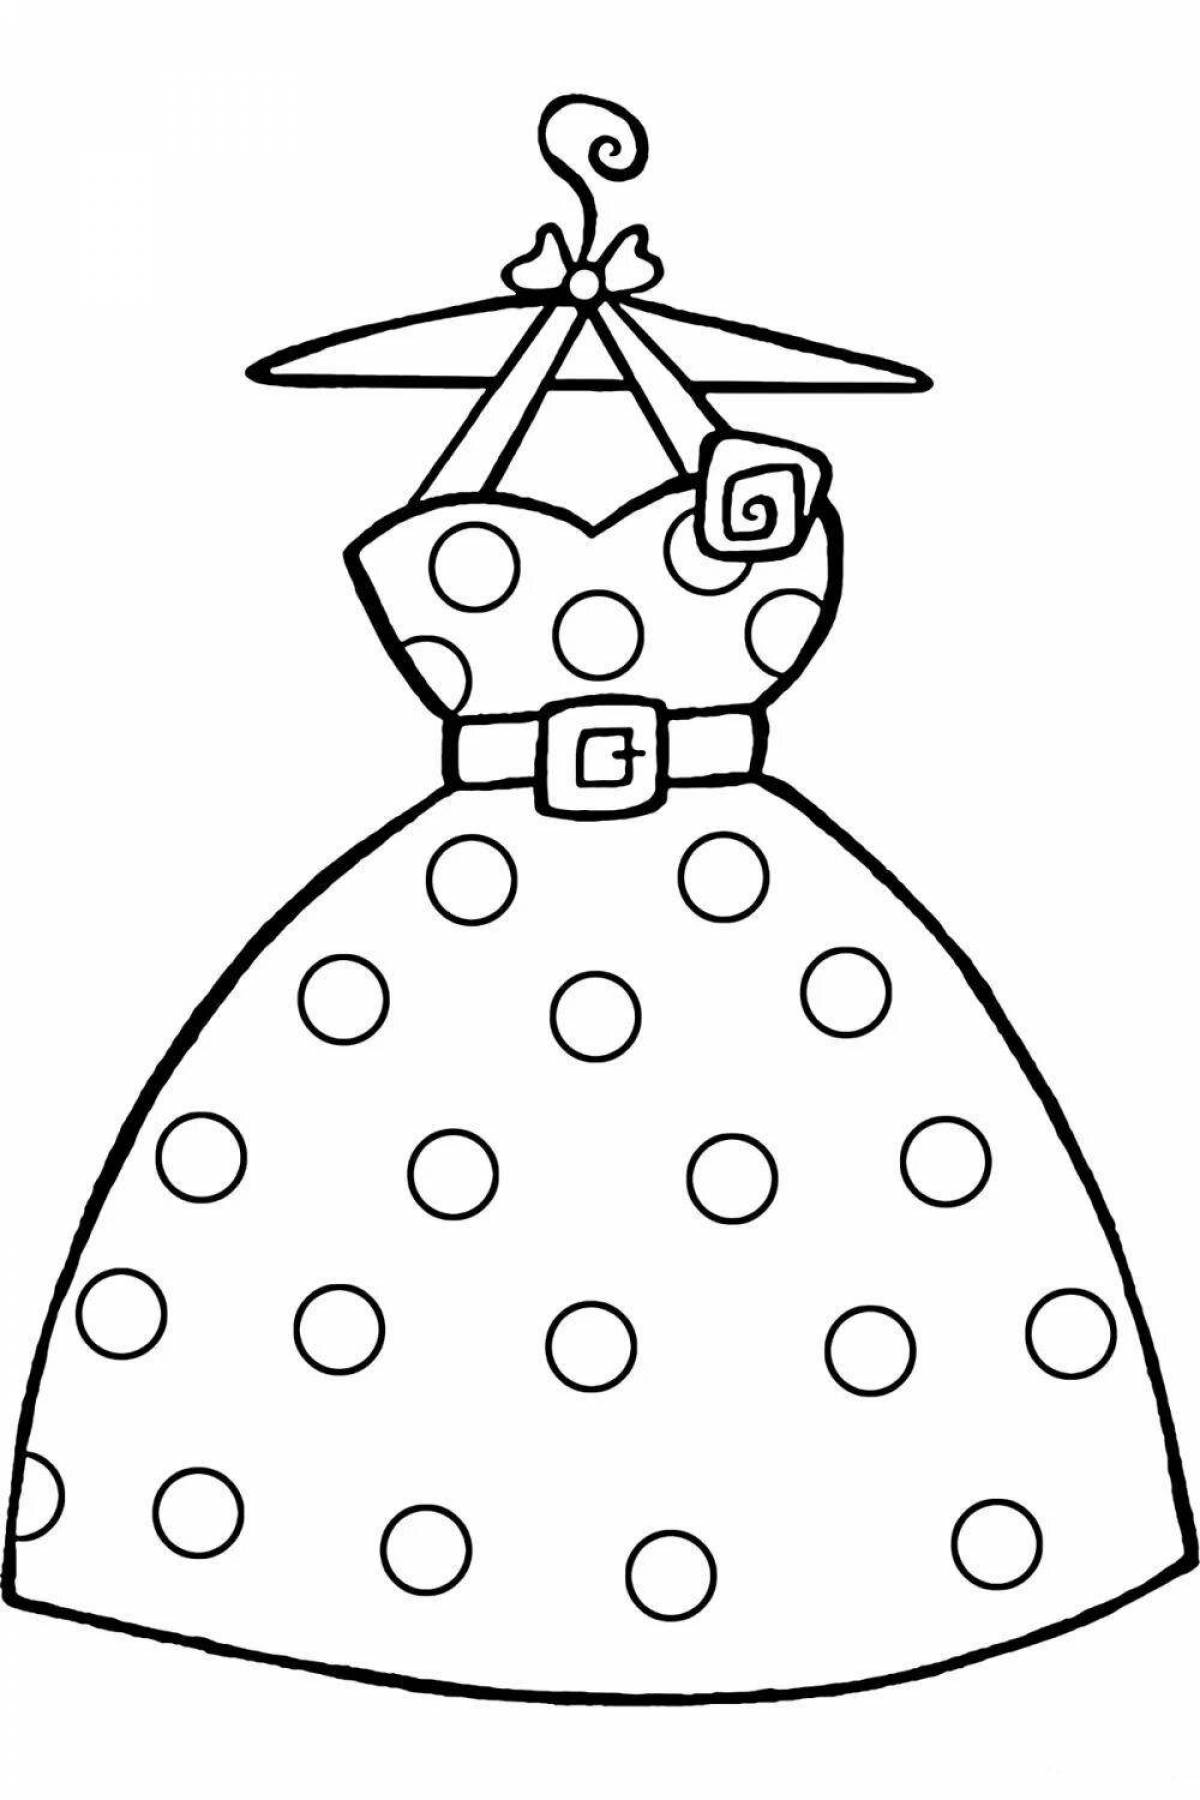 Floating dress coloring page for 5-6 year olds